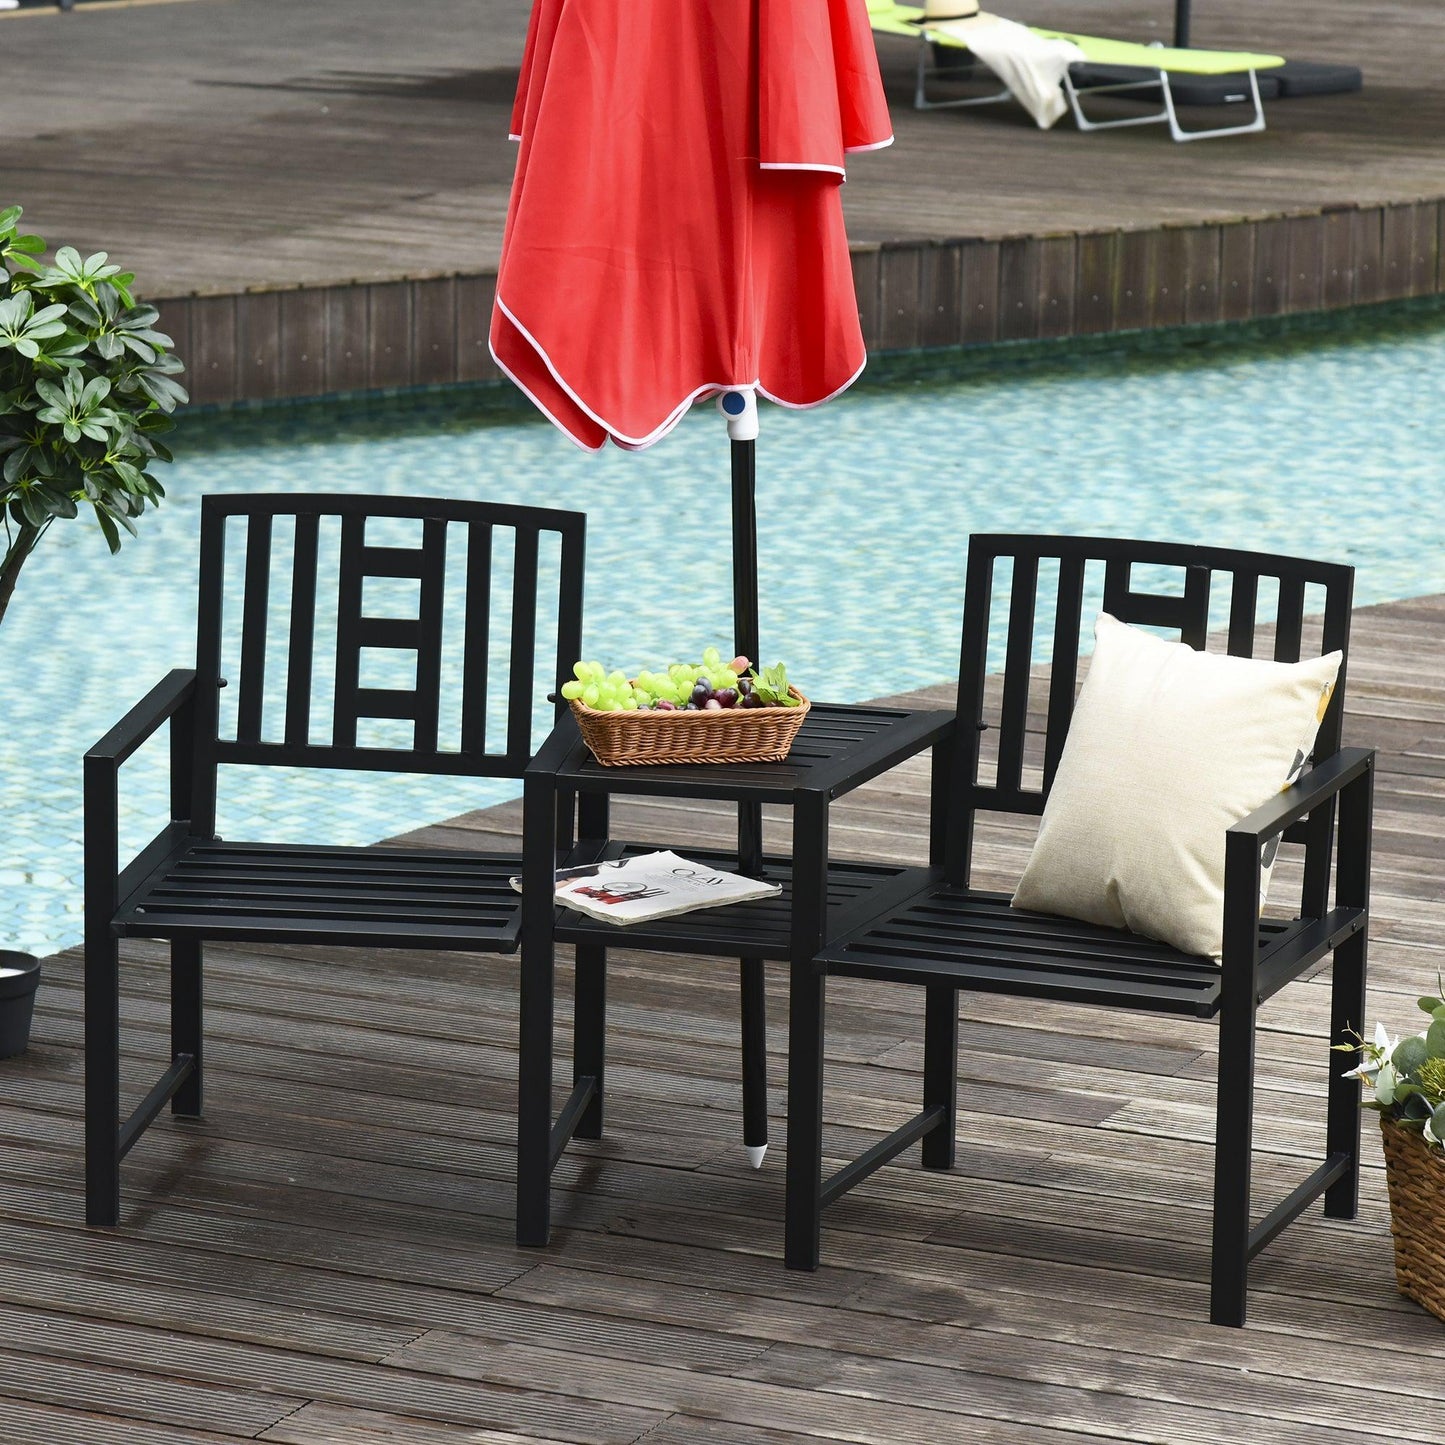 Outsunny Patio Tete-a-tete Chair Set with Coffee Table - ALL4U RETAILER LTD